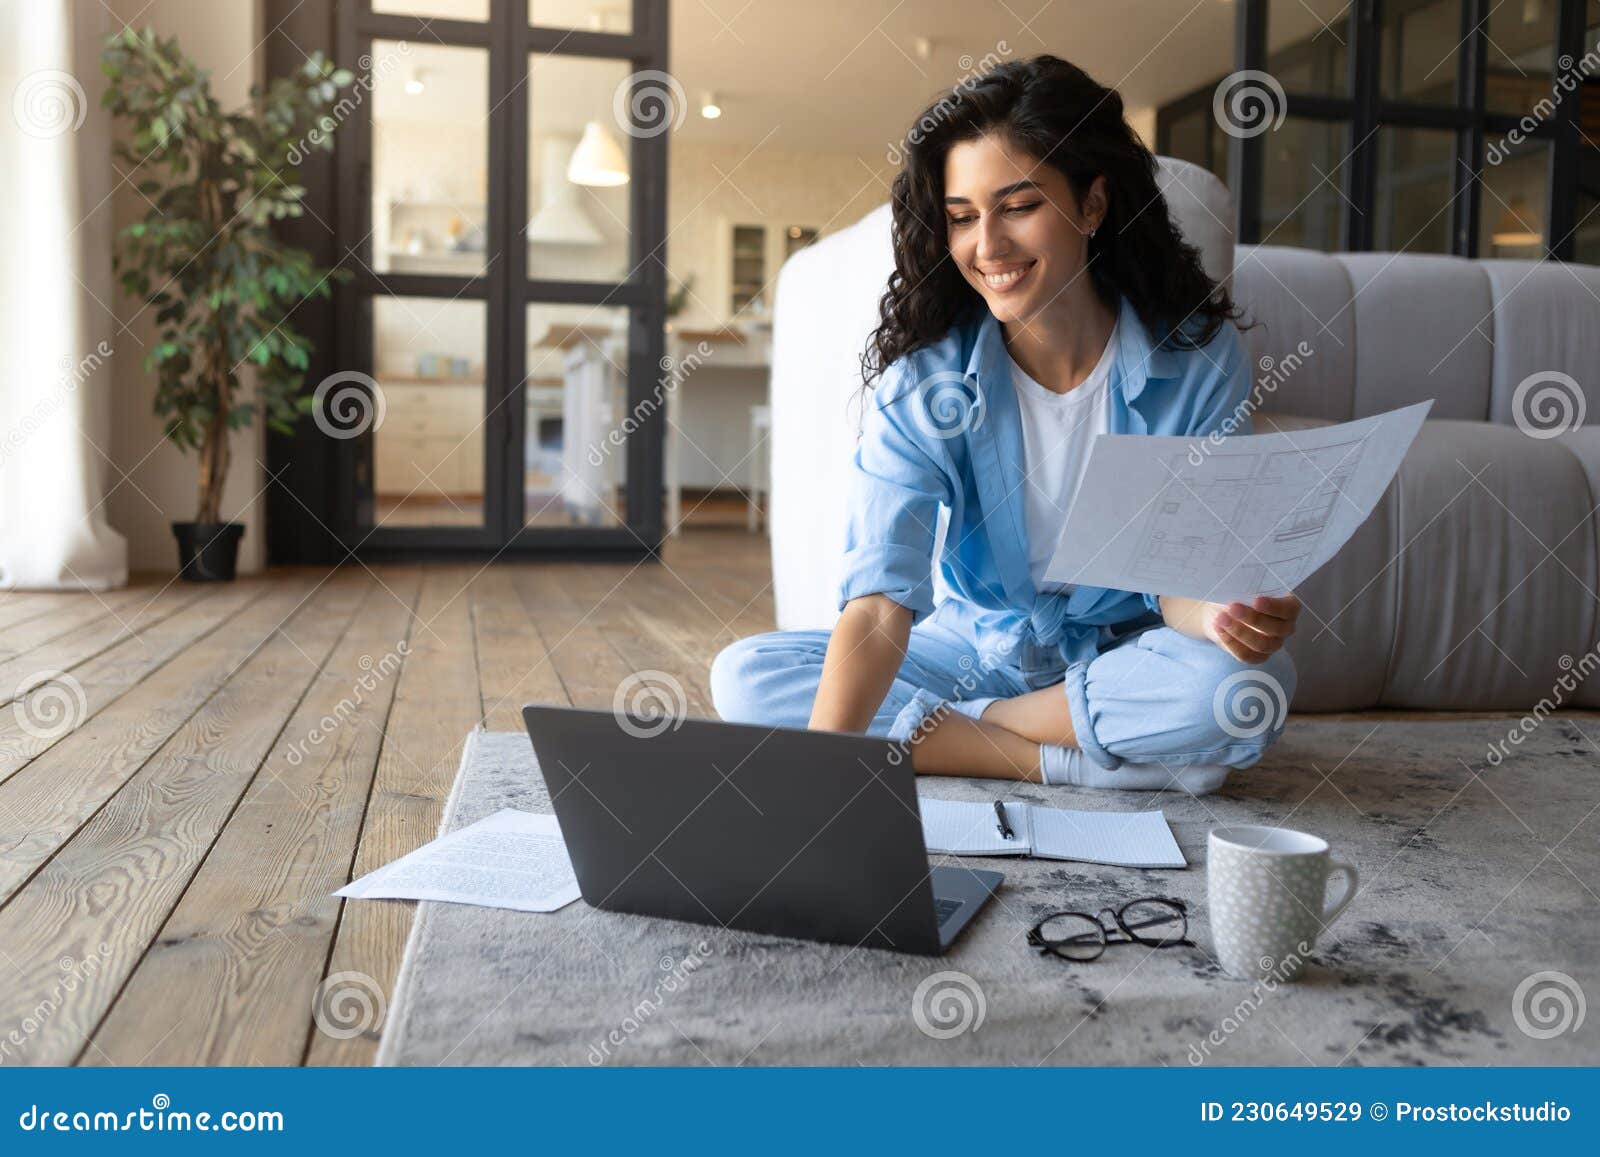 happy young cauasian lady working or studying on laptop computer, holding documents, looking at pc screen indoors